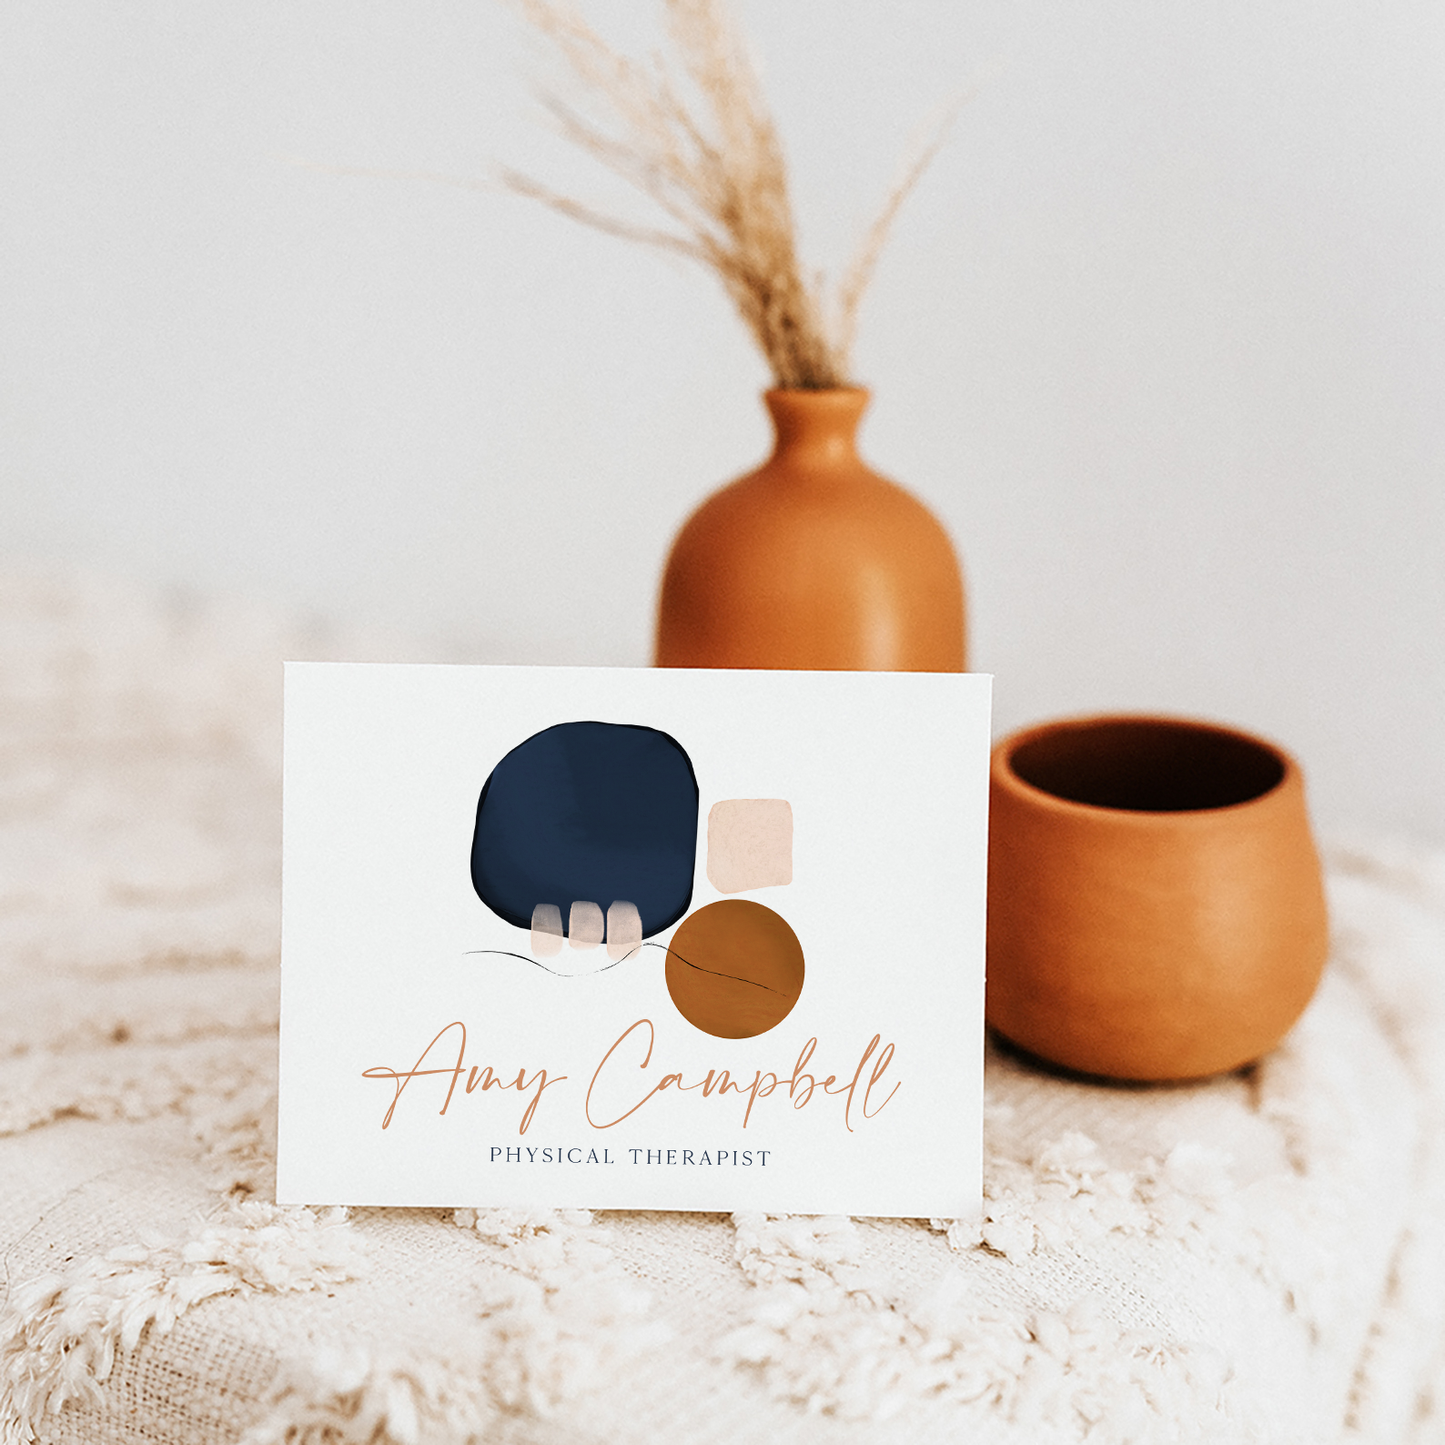 Amy Campbell | Premade Logo Design | Boho Shapes, Modern Abstract, New Age